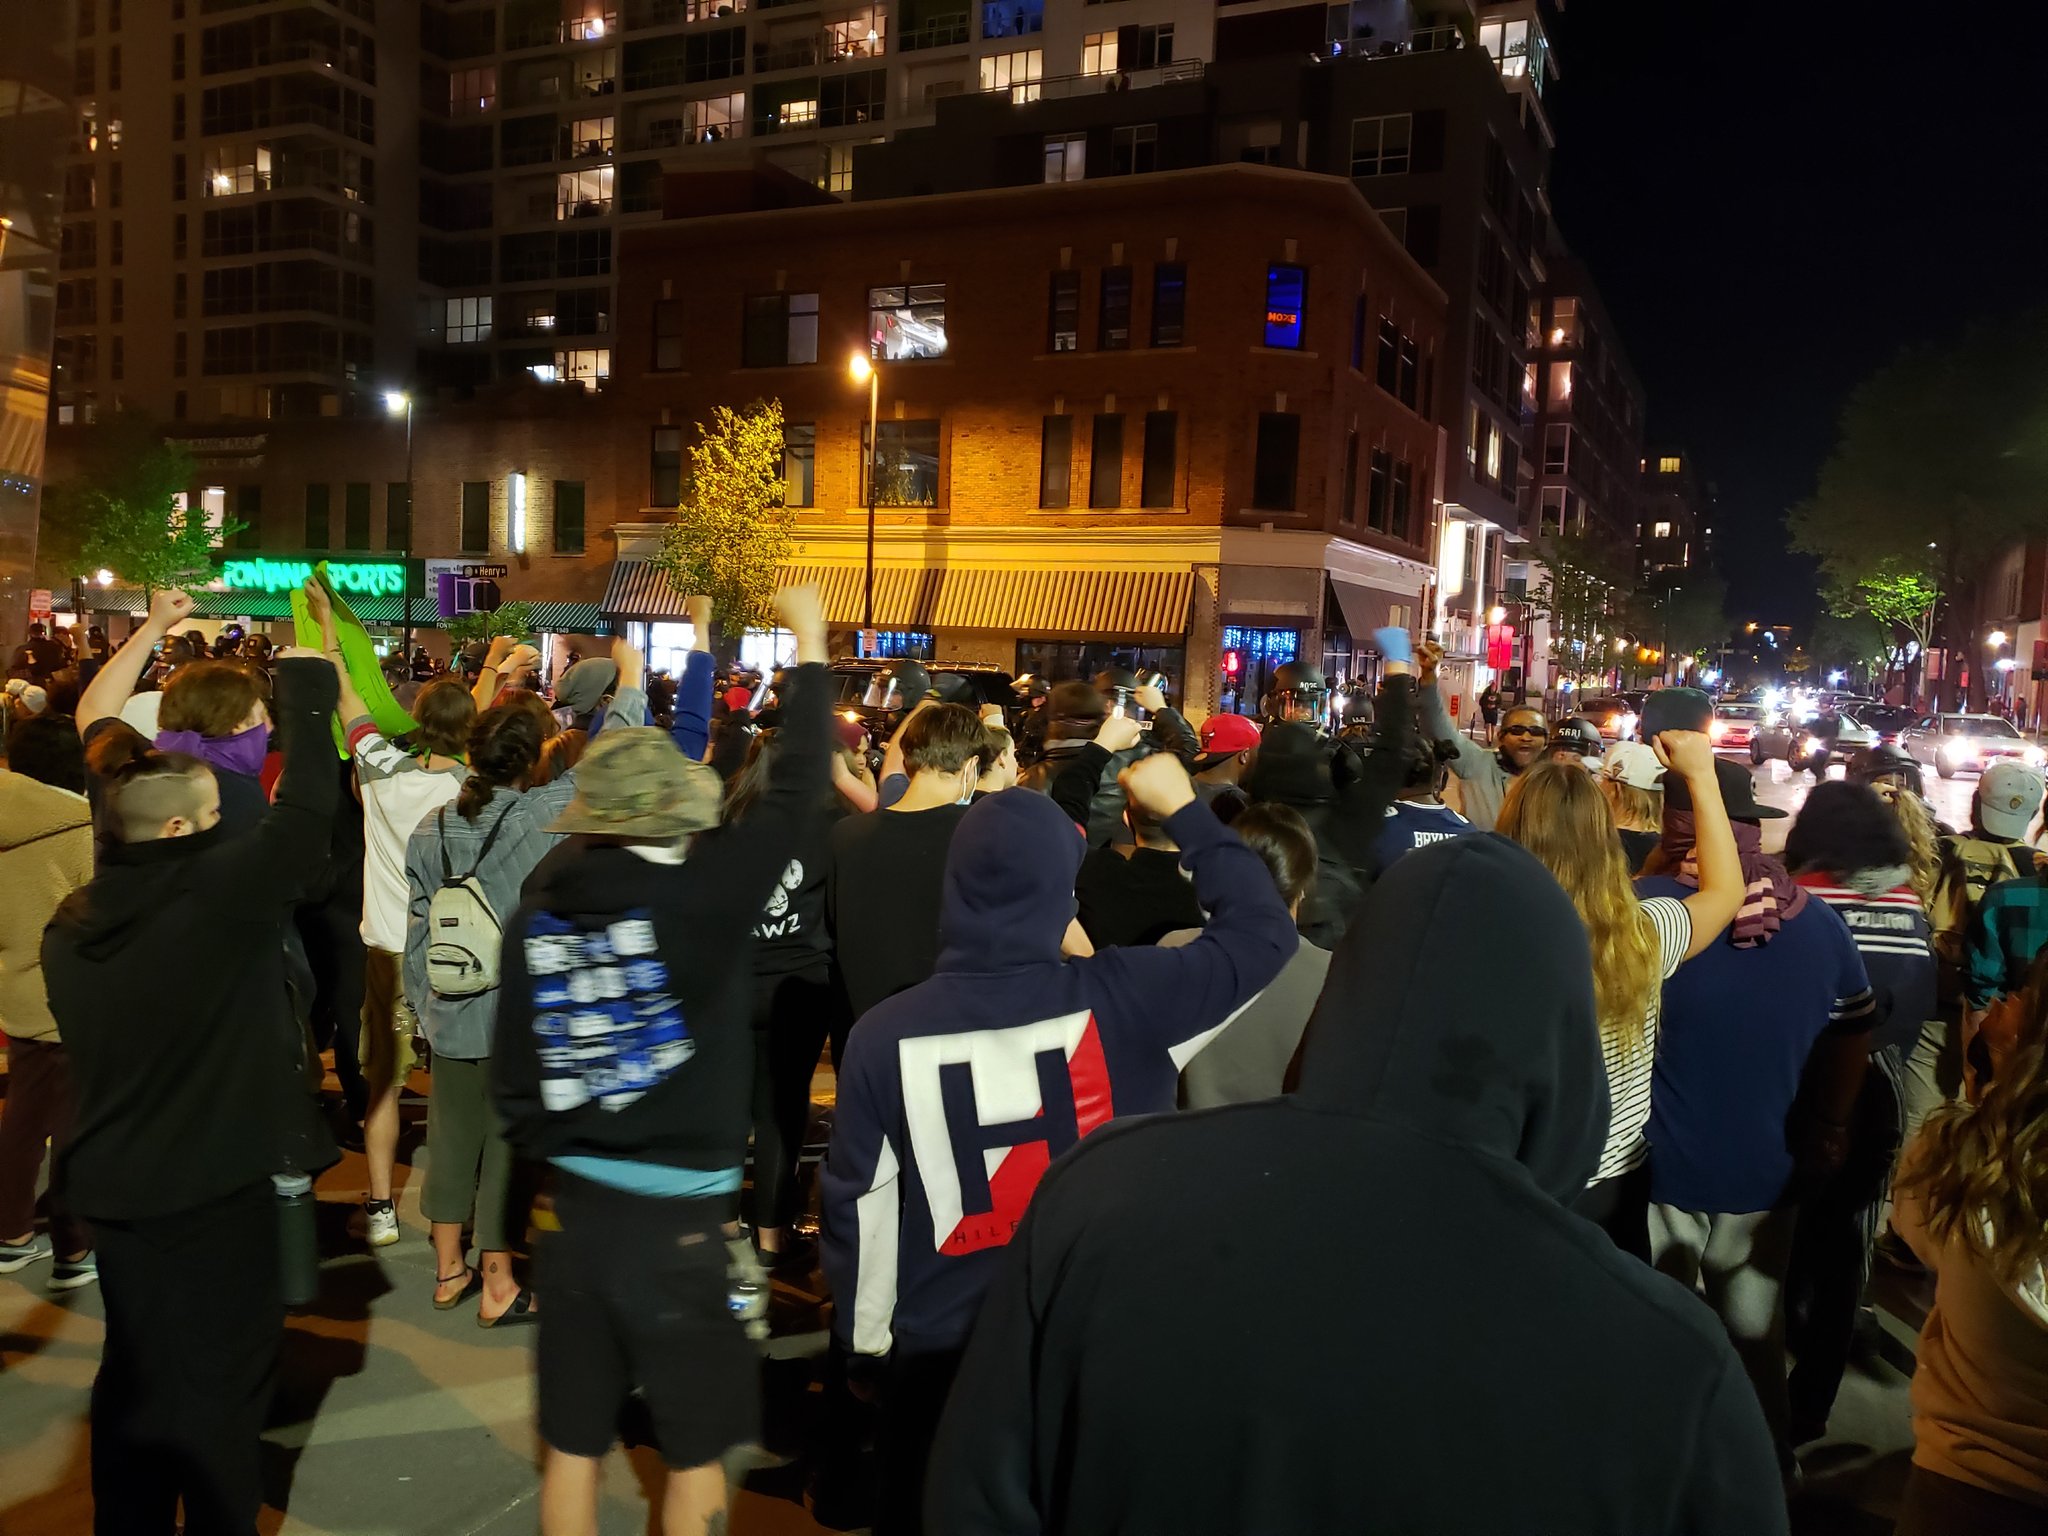 Protesters face off against police Saturday night in downtown Madison.